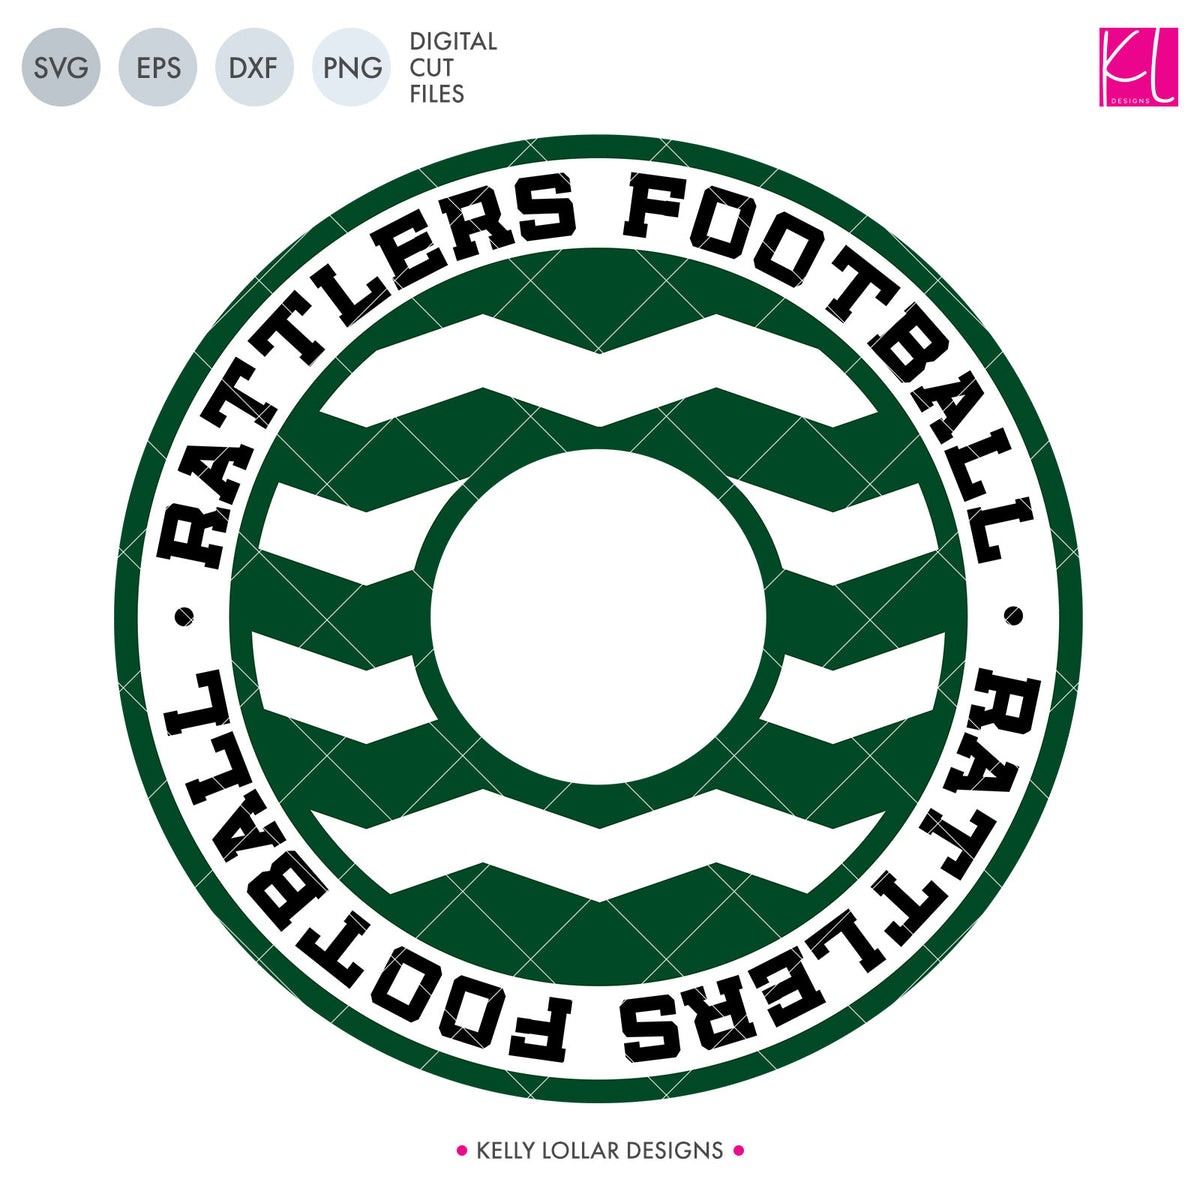 Rattlers Football Bundle | SVG DXF EPS PNG Cut Files